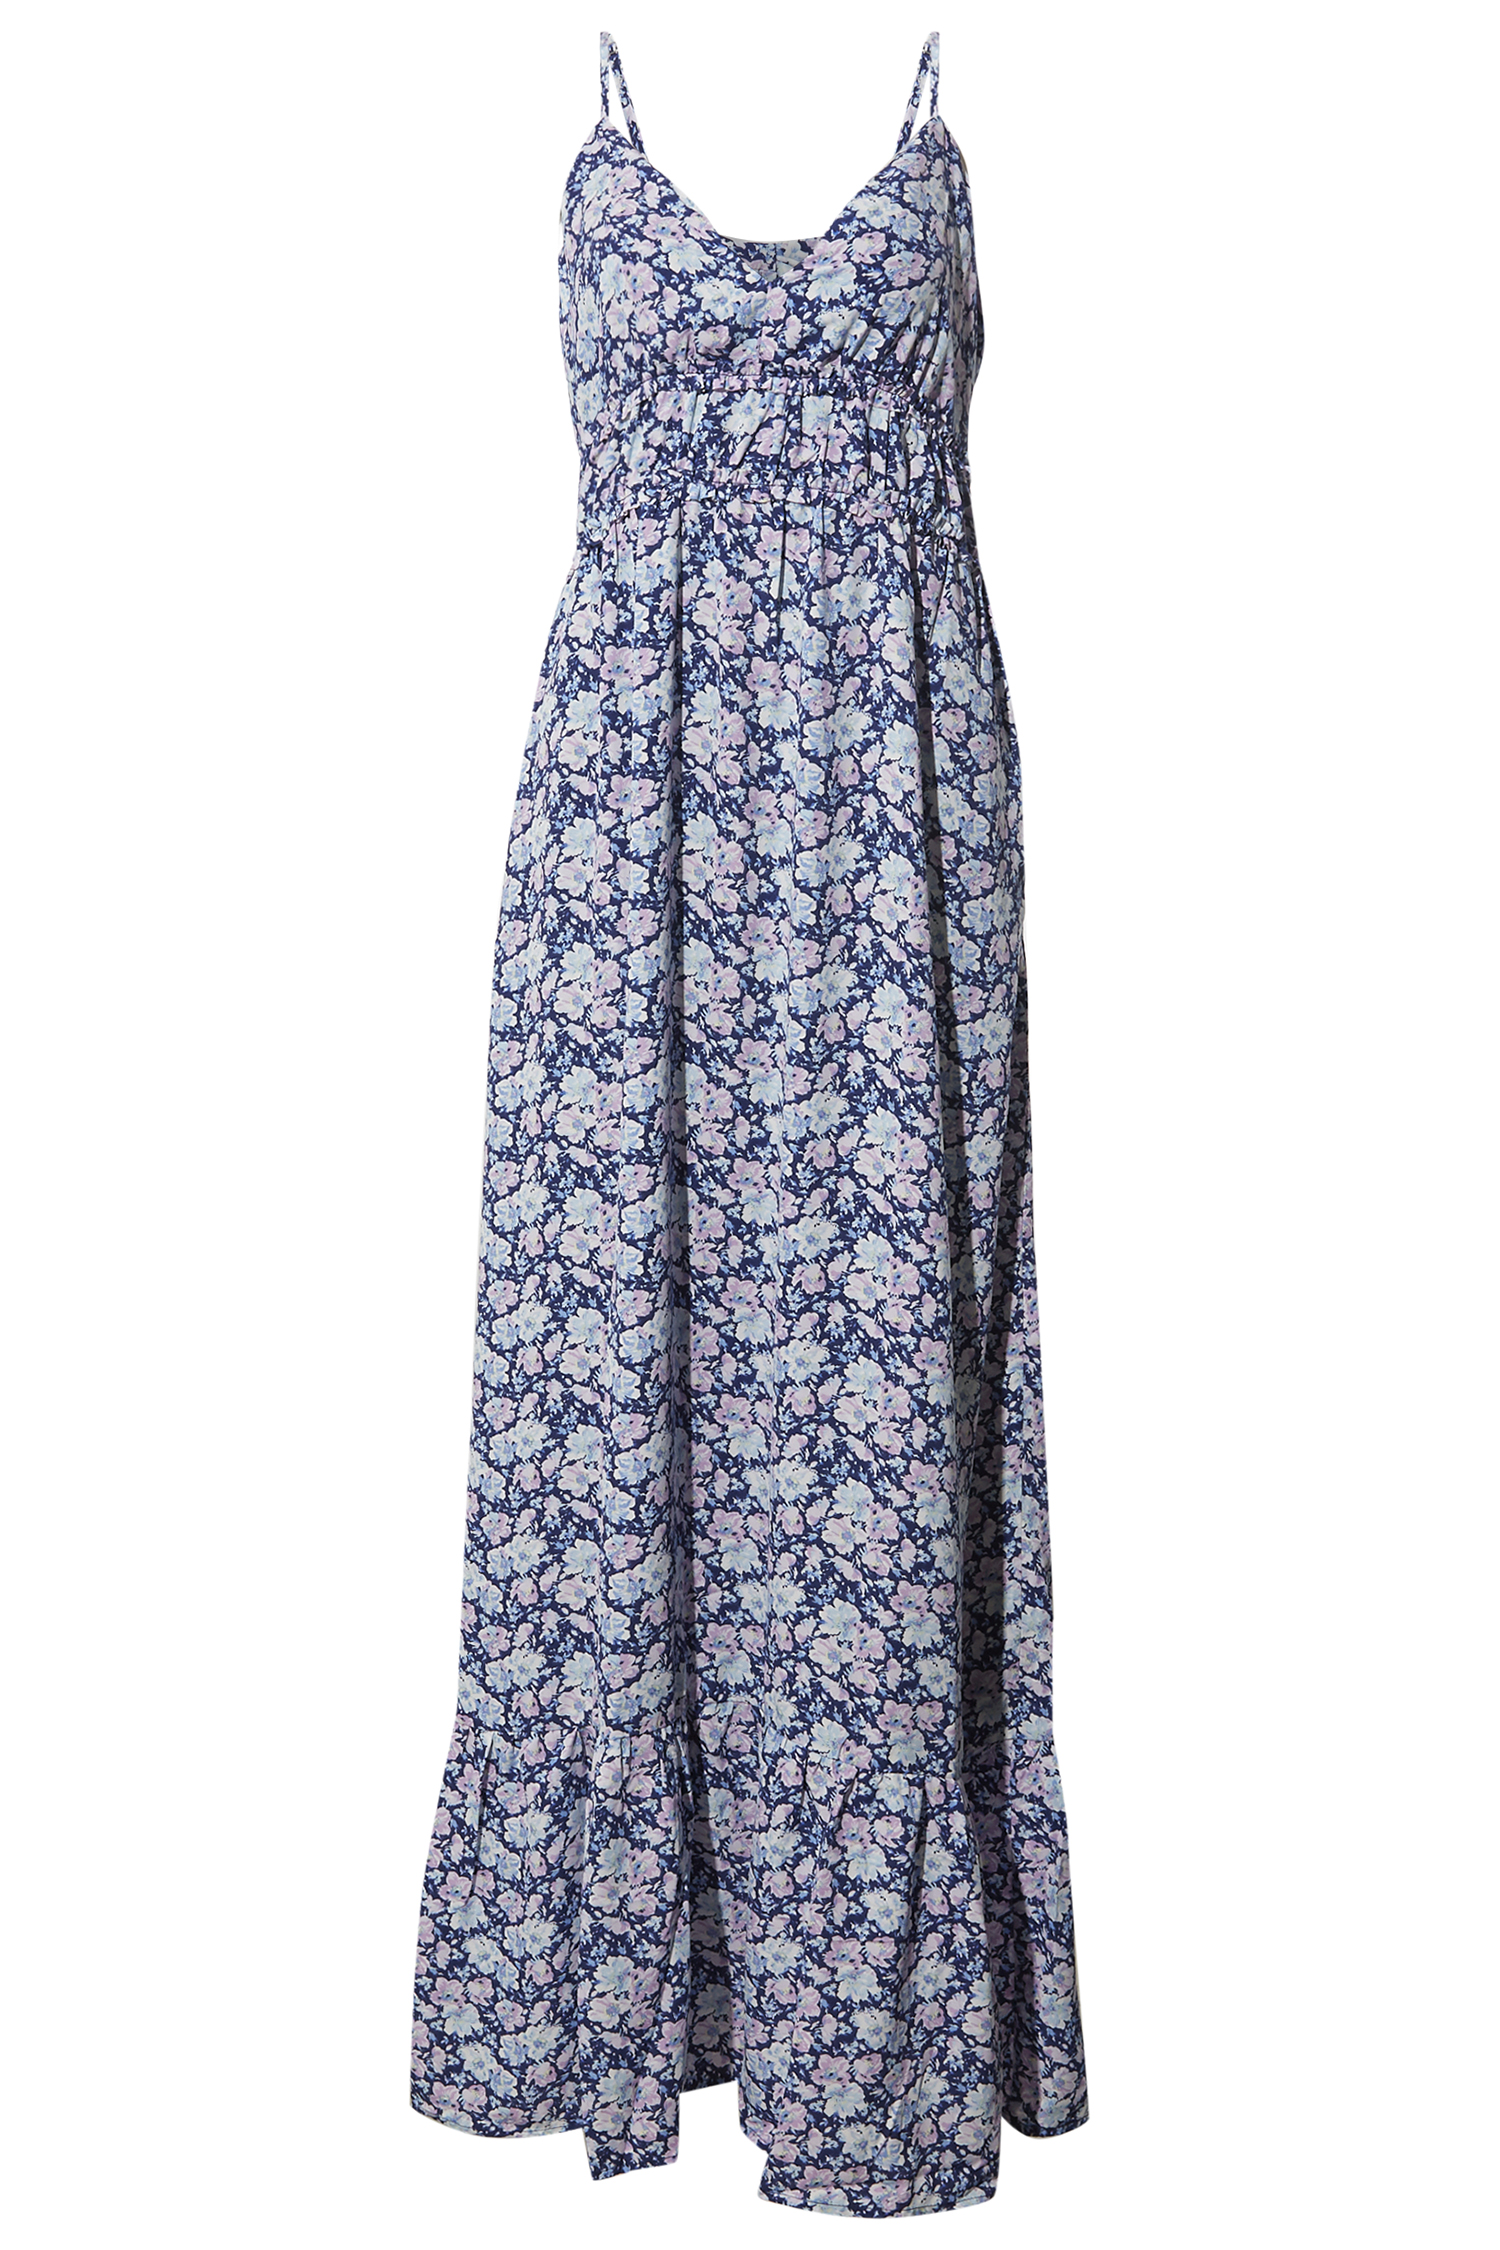 Skies are Blue Back Detail Maxi Dress